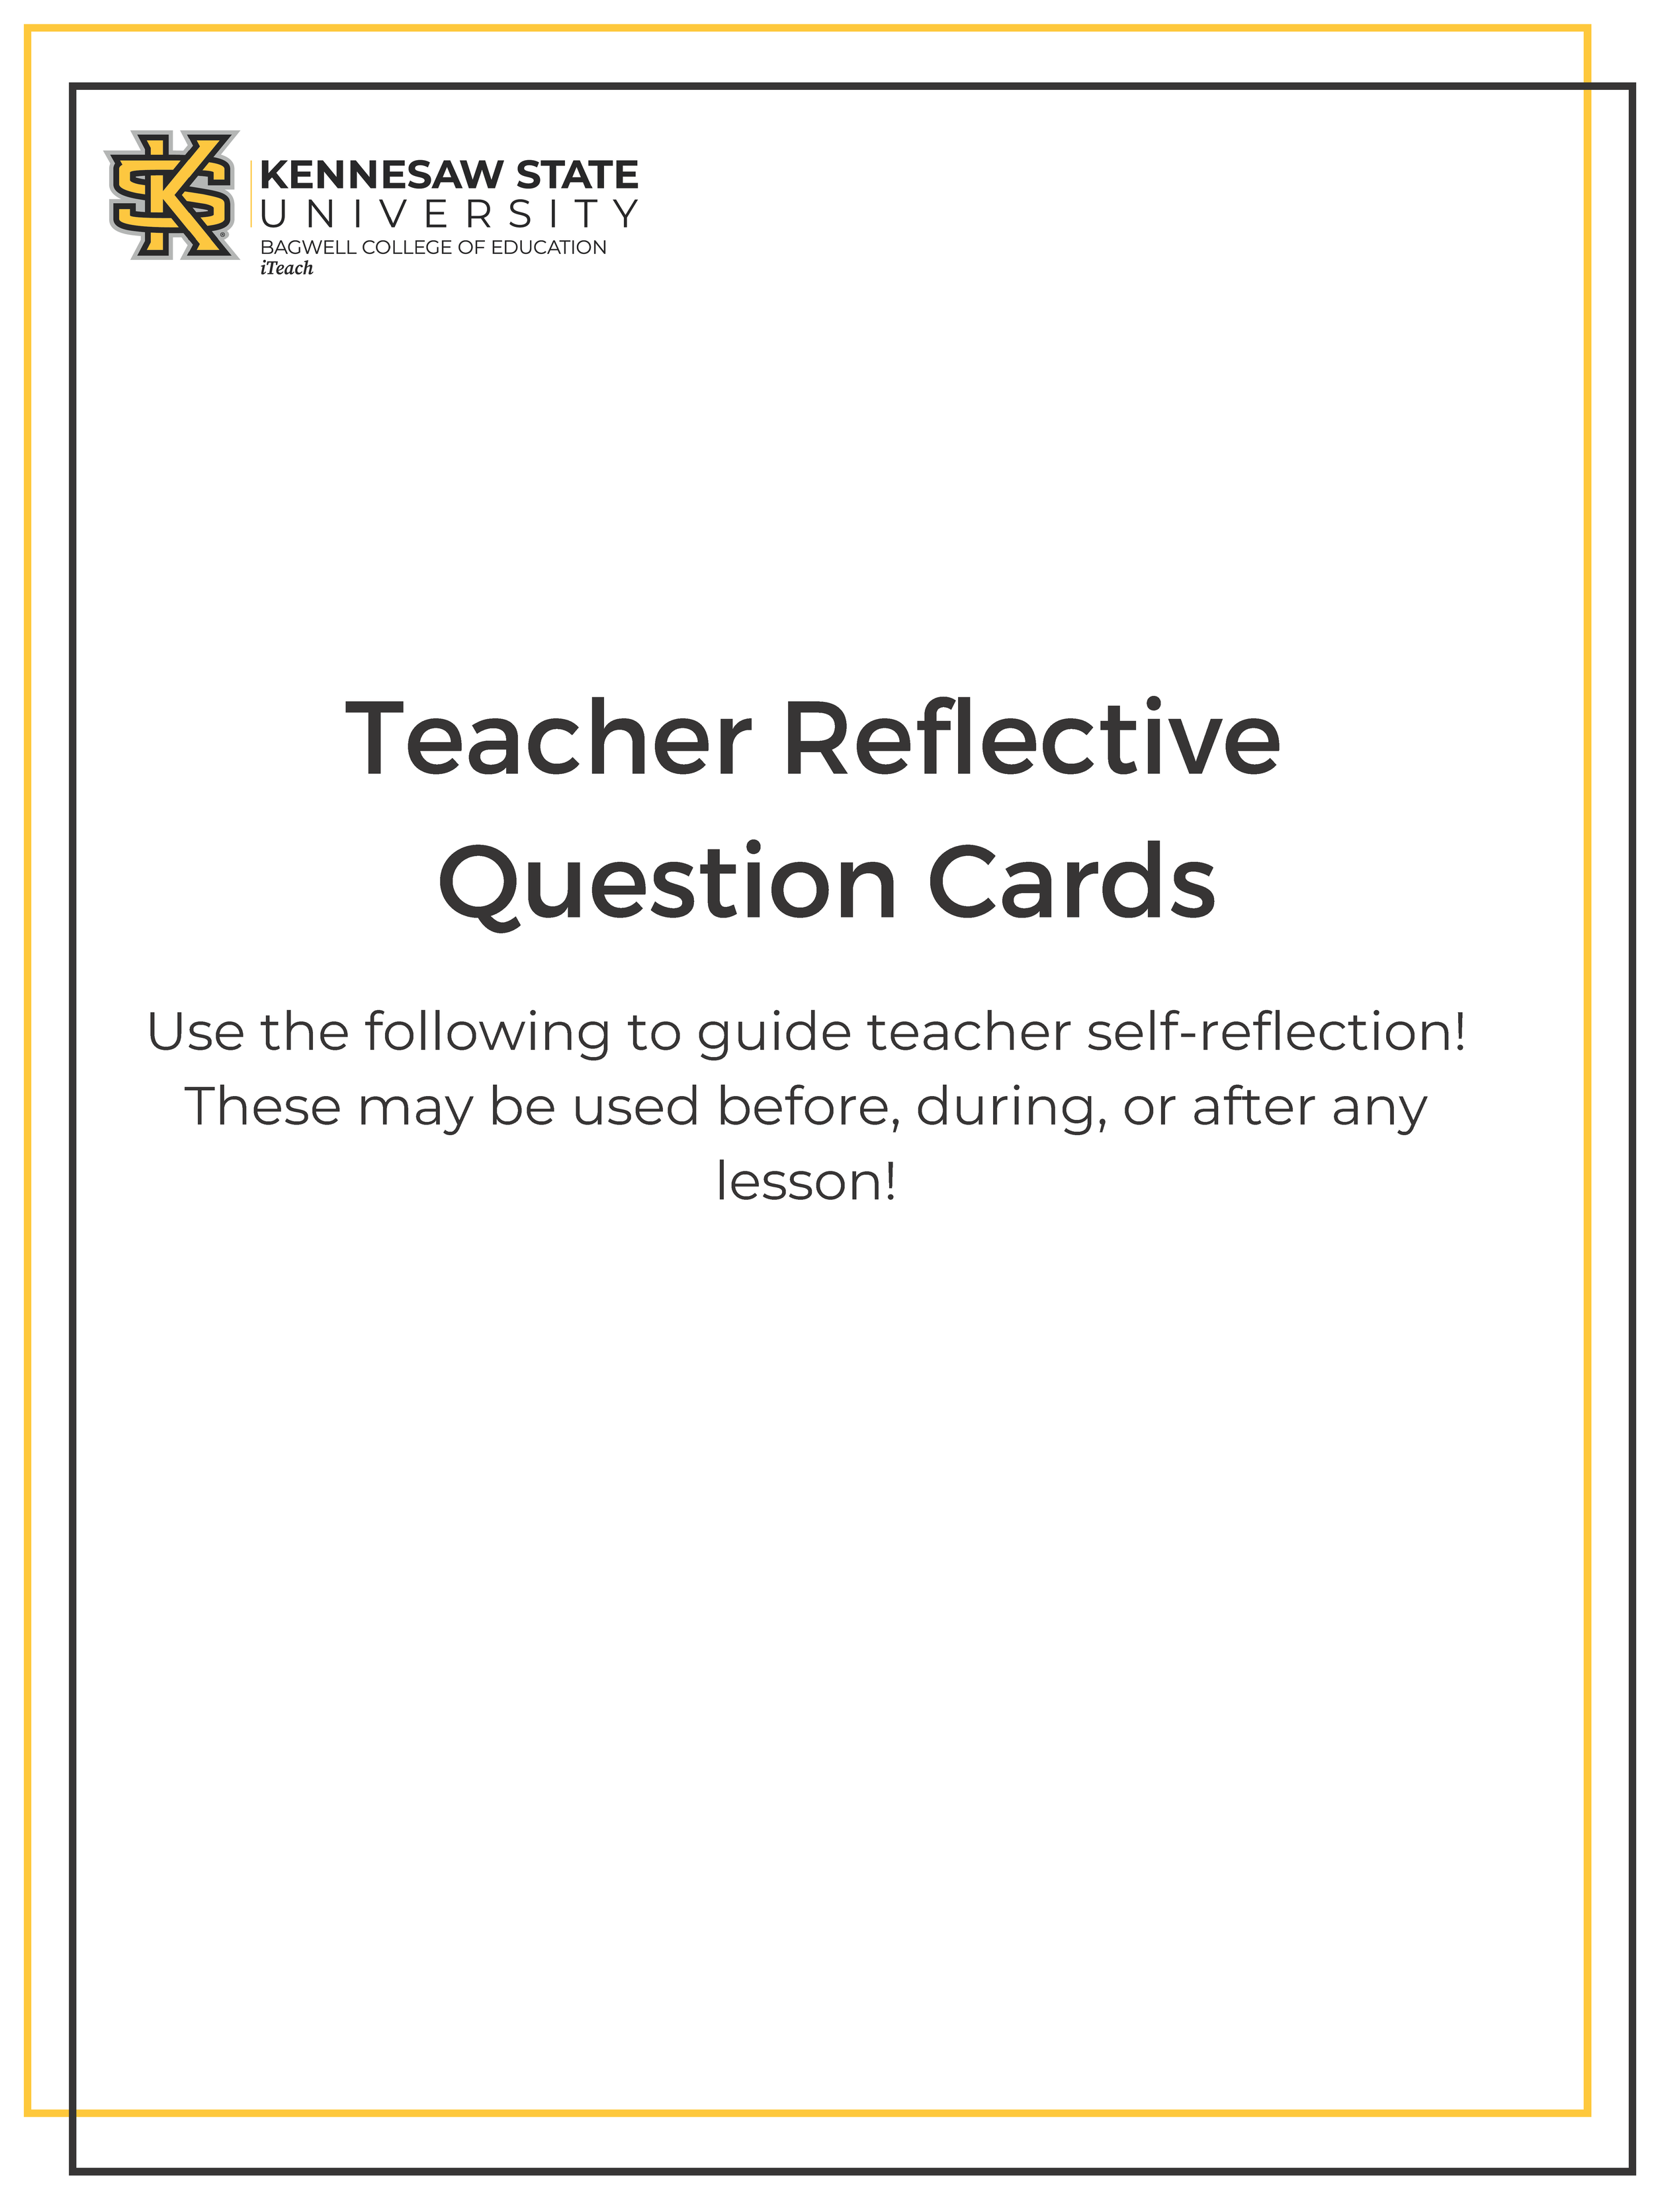 Teacher Reflection Question Cards_Page_1.png